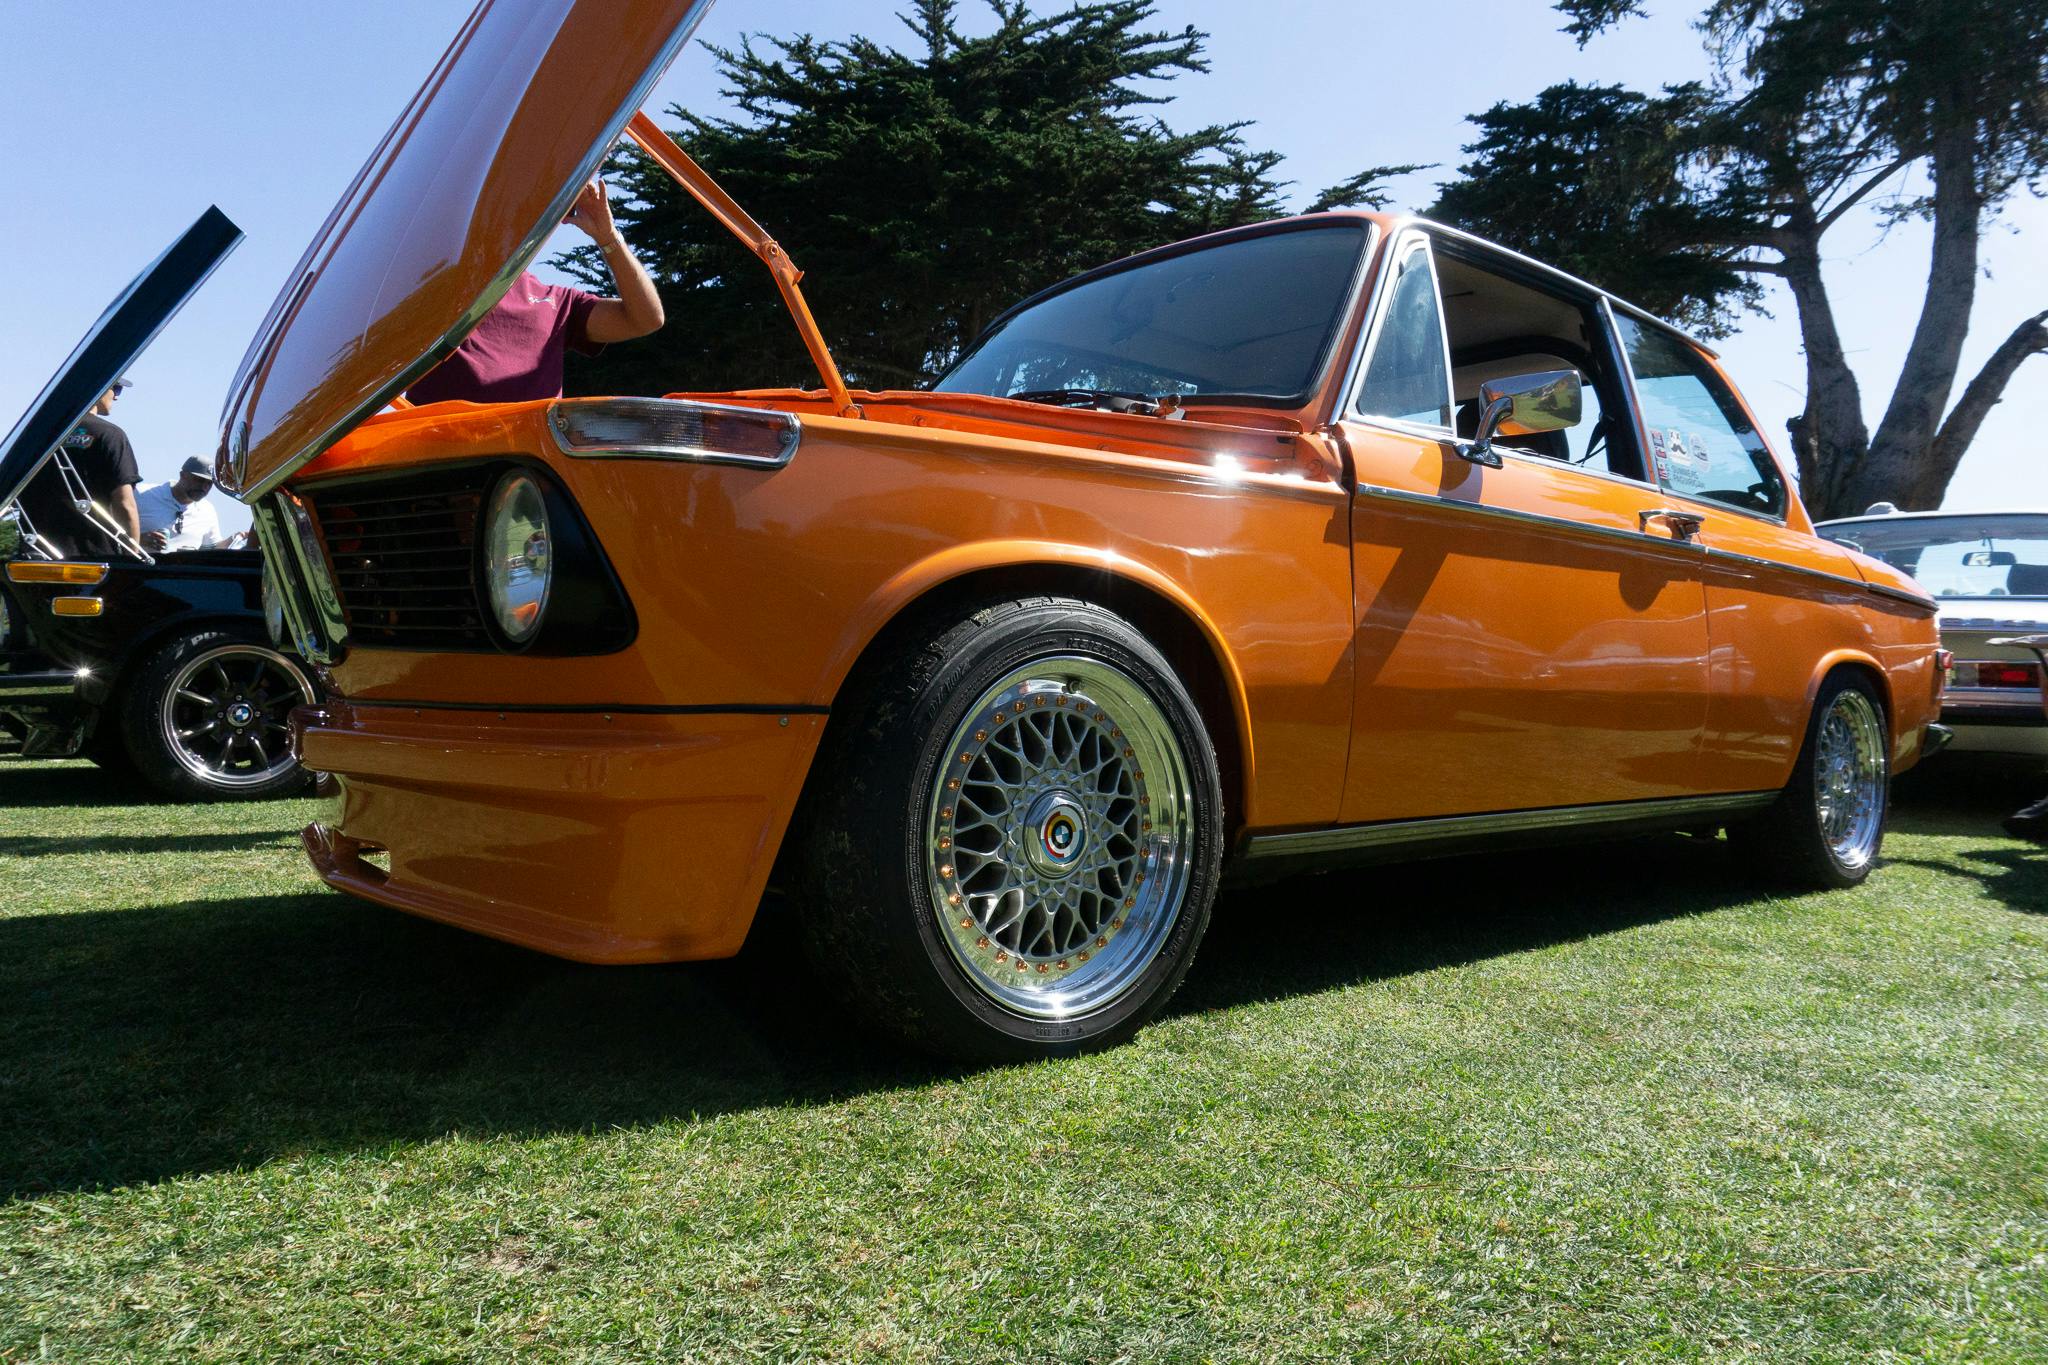 Honda swapped BMW 2002 legends of the autobahn 2022